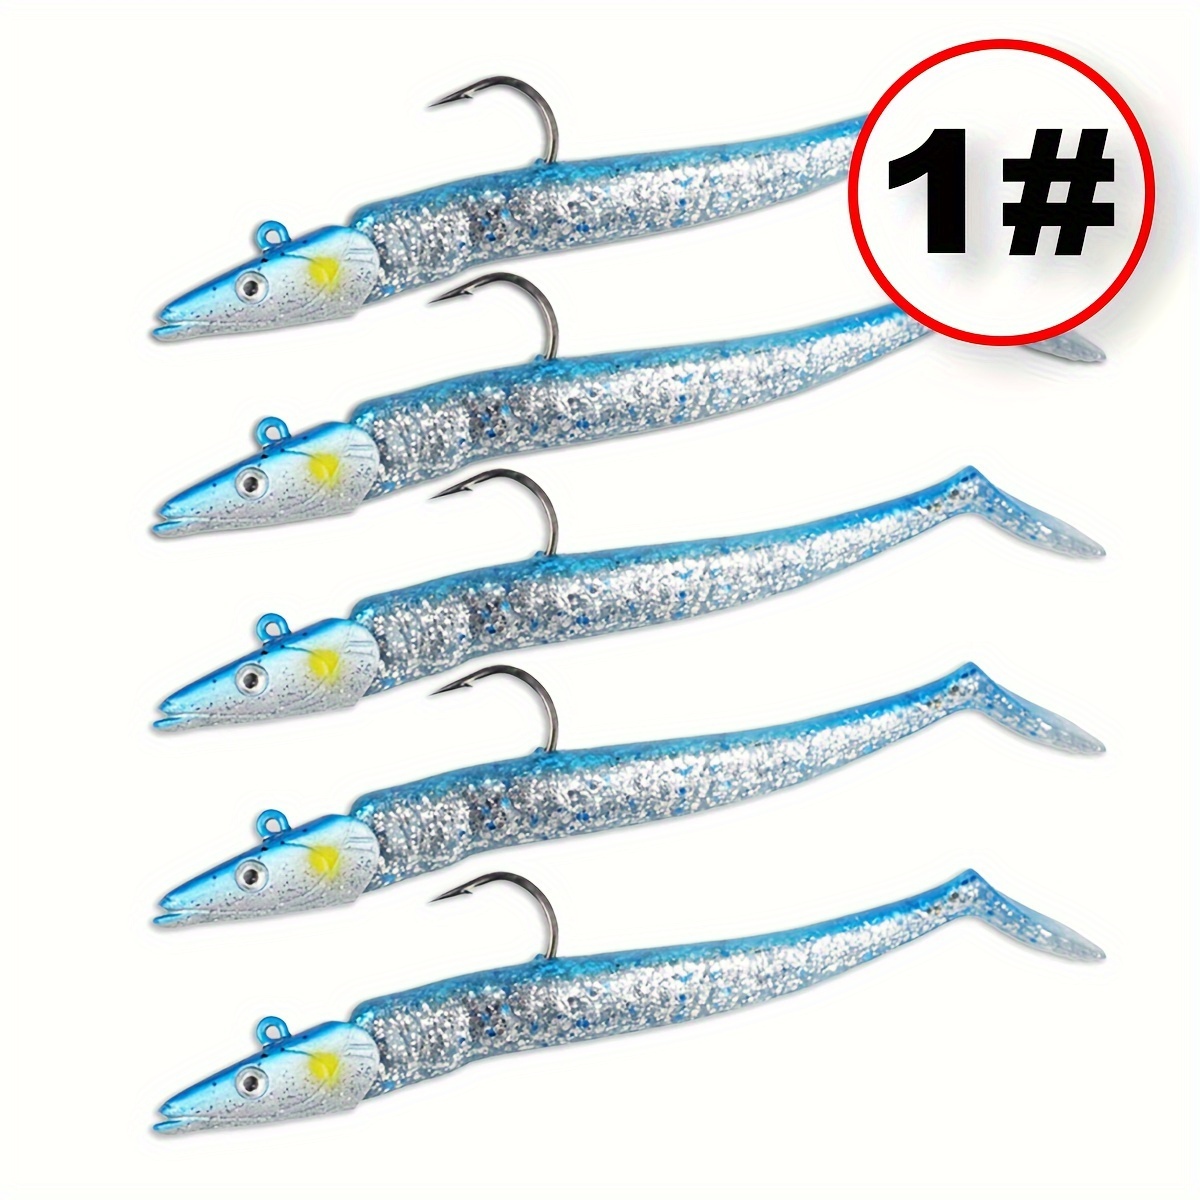 1/4 ounce 3 Pack Silver Pearl Standard Swim Bait HELLRAZOR Rattling Jig  head, Saltwater and Freshwater fishing tackle